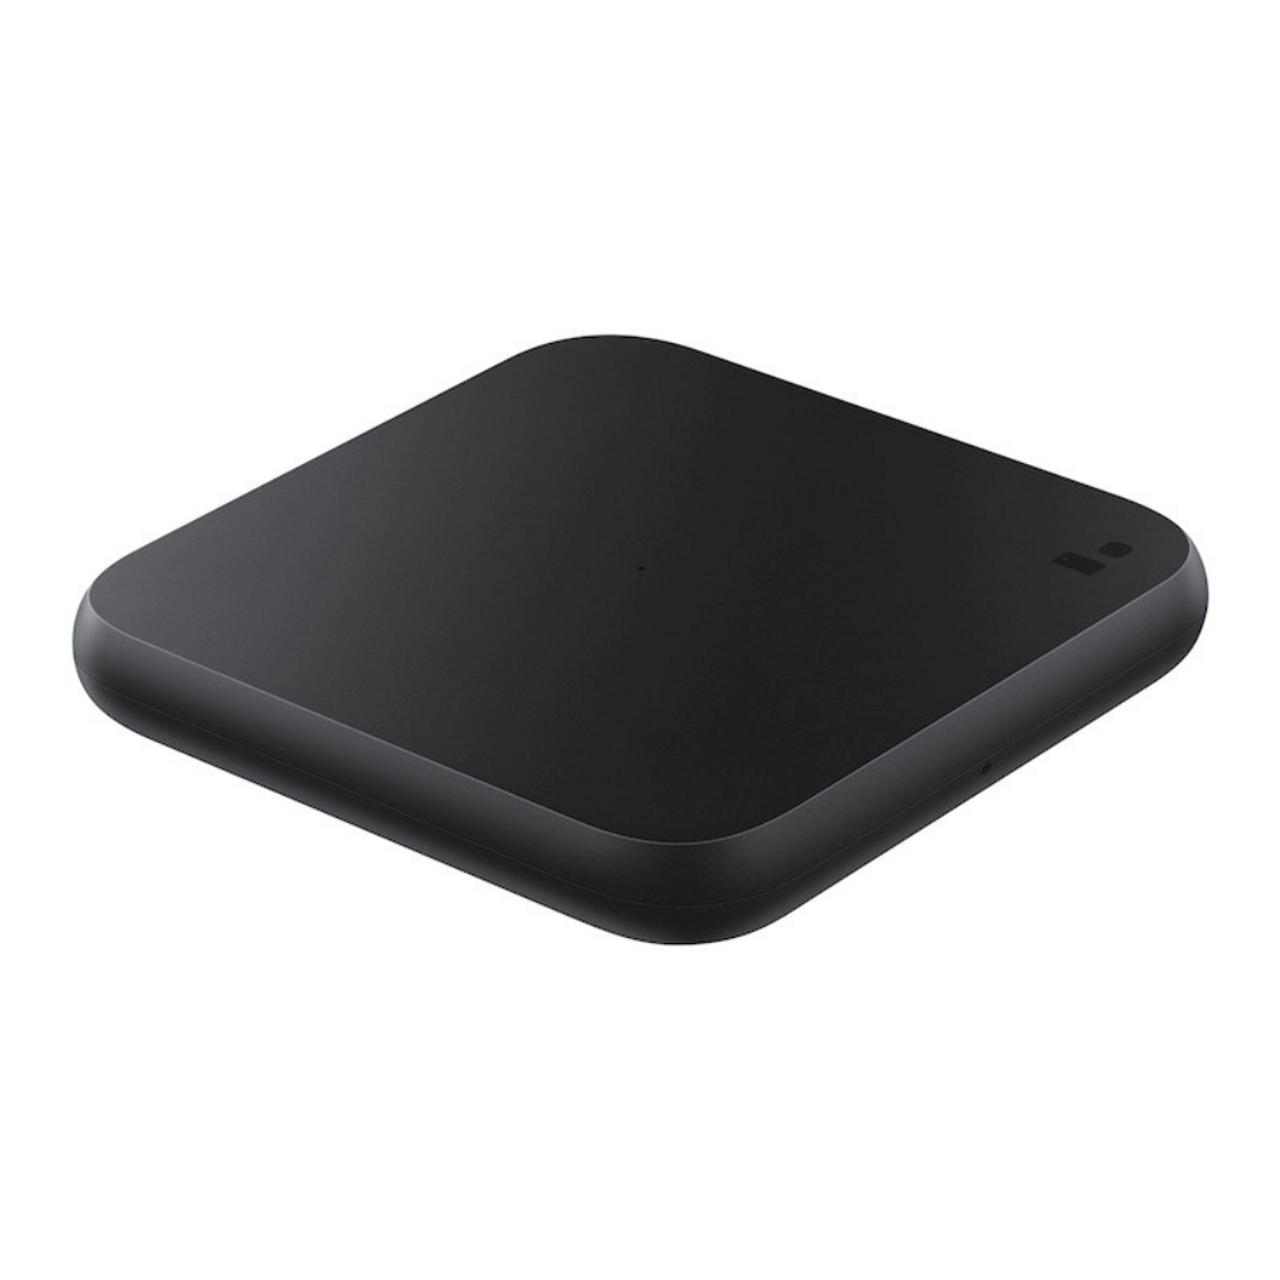 Samsung Wireless Charger Pad product image